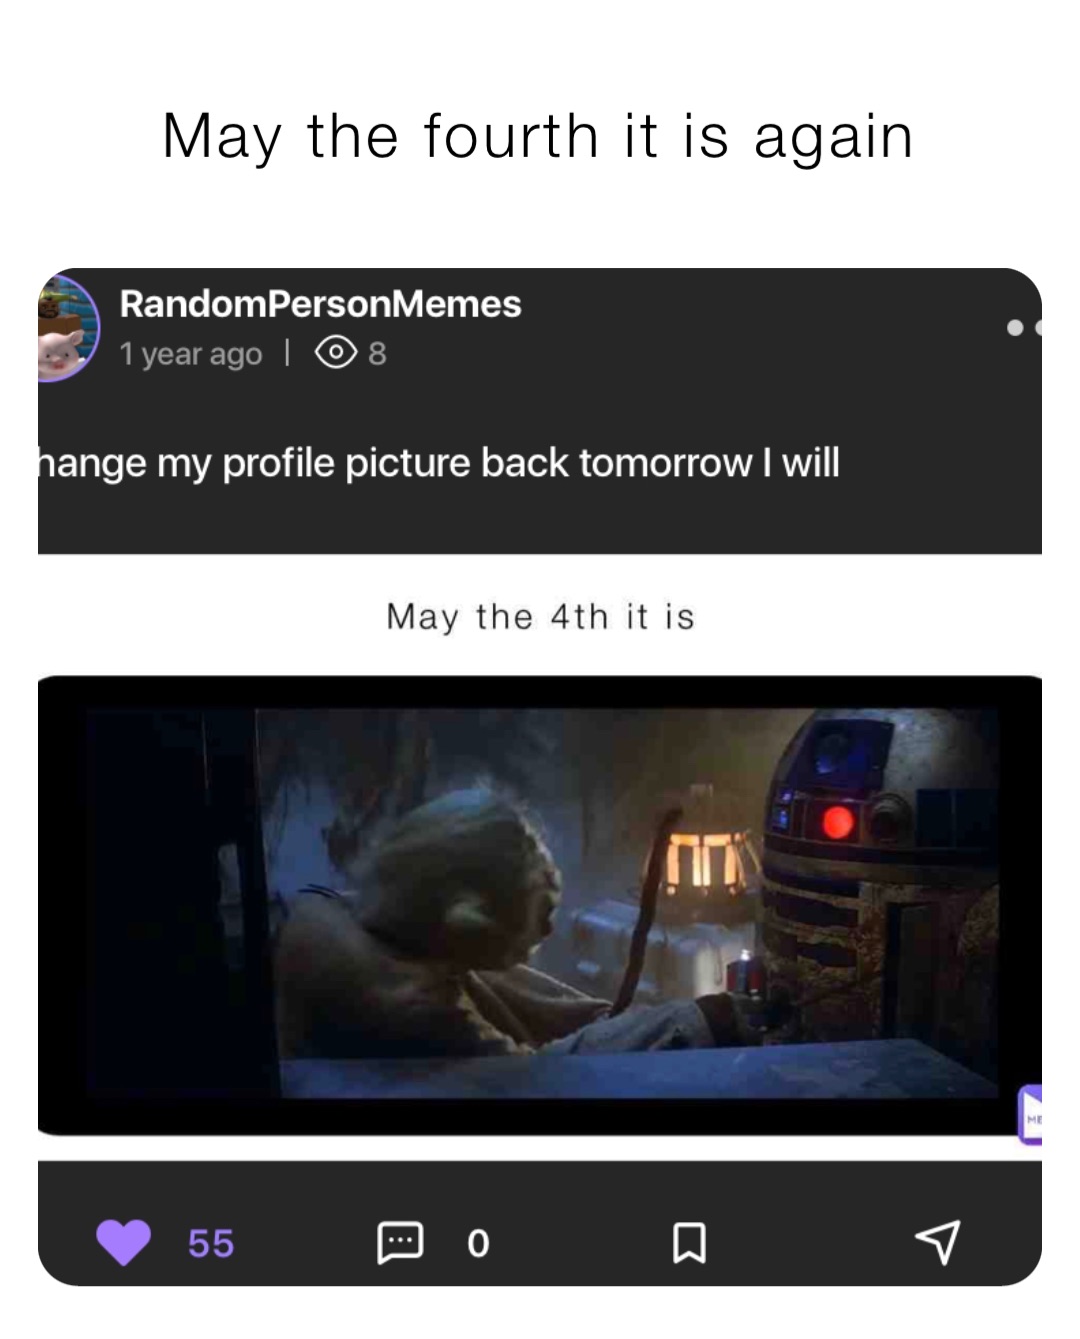 May the fourth it is again